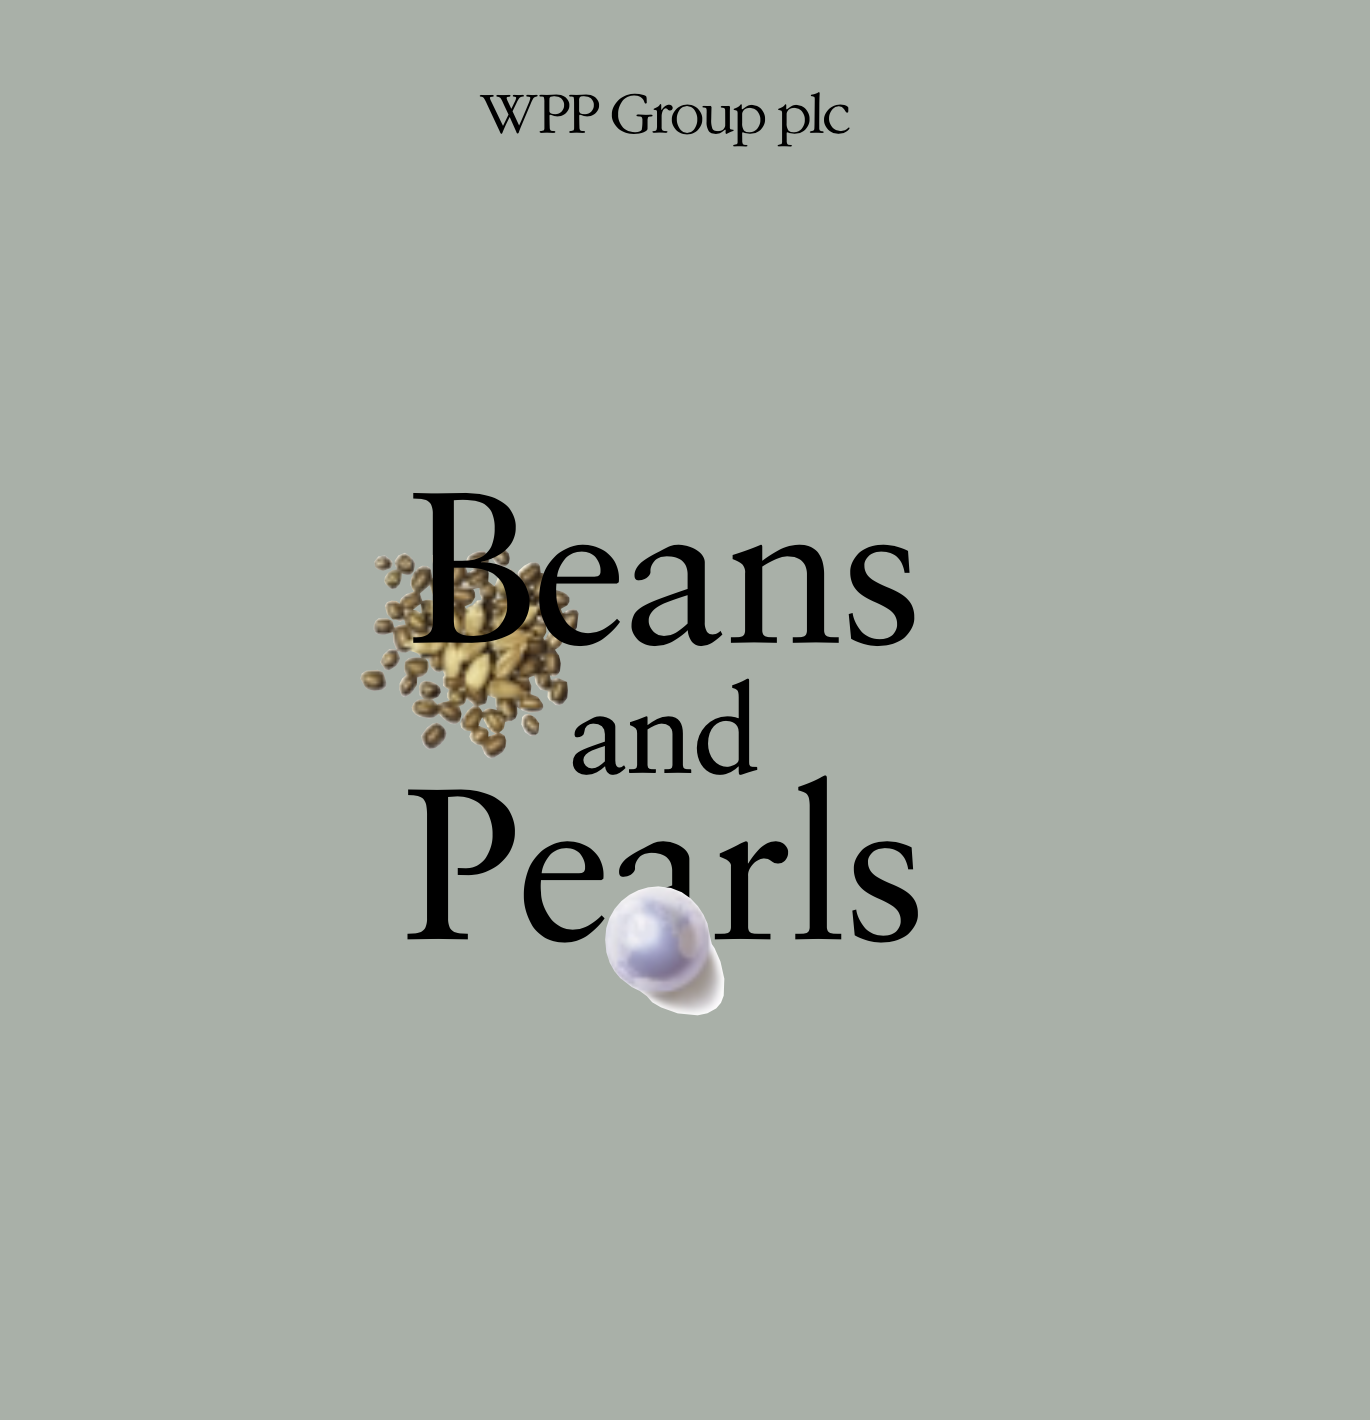 Image of a piece of paper with text on it annd a drawing of beans and a pearl